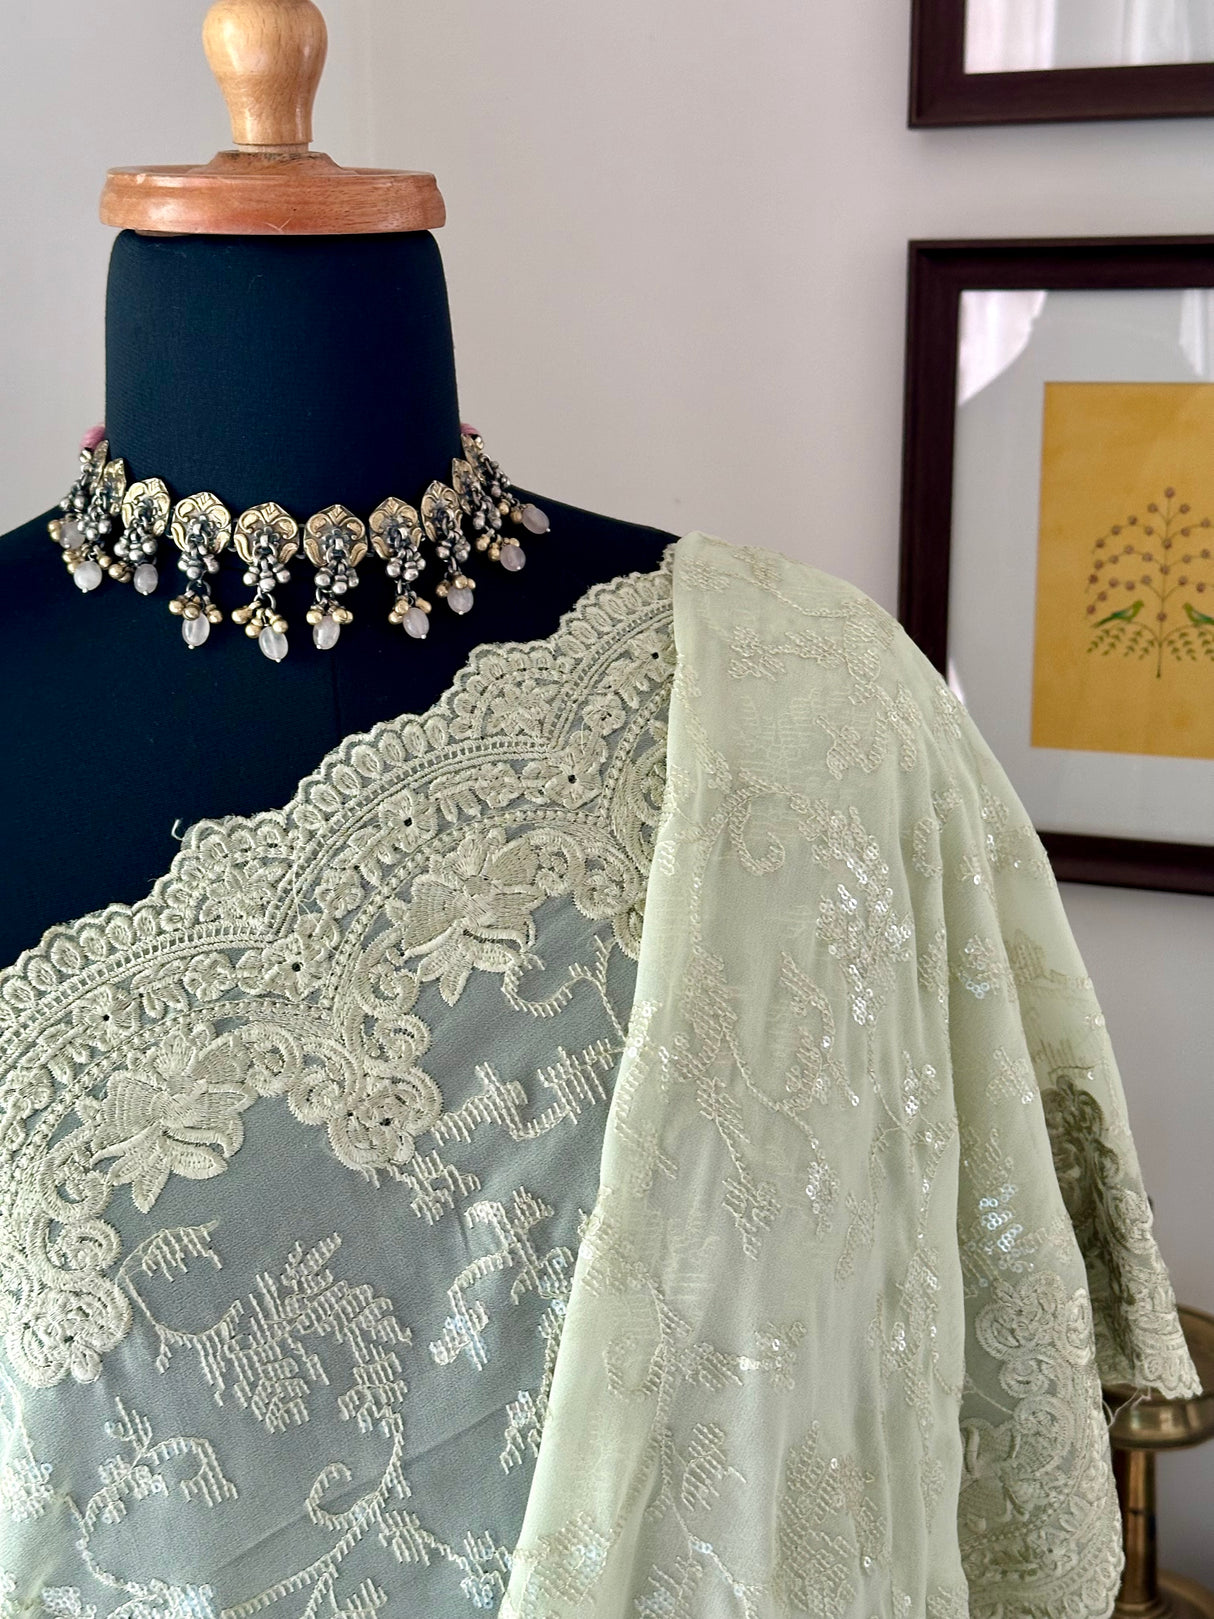 Georgette saree embellished with machine embroidery